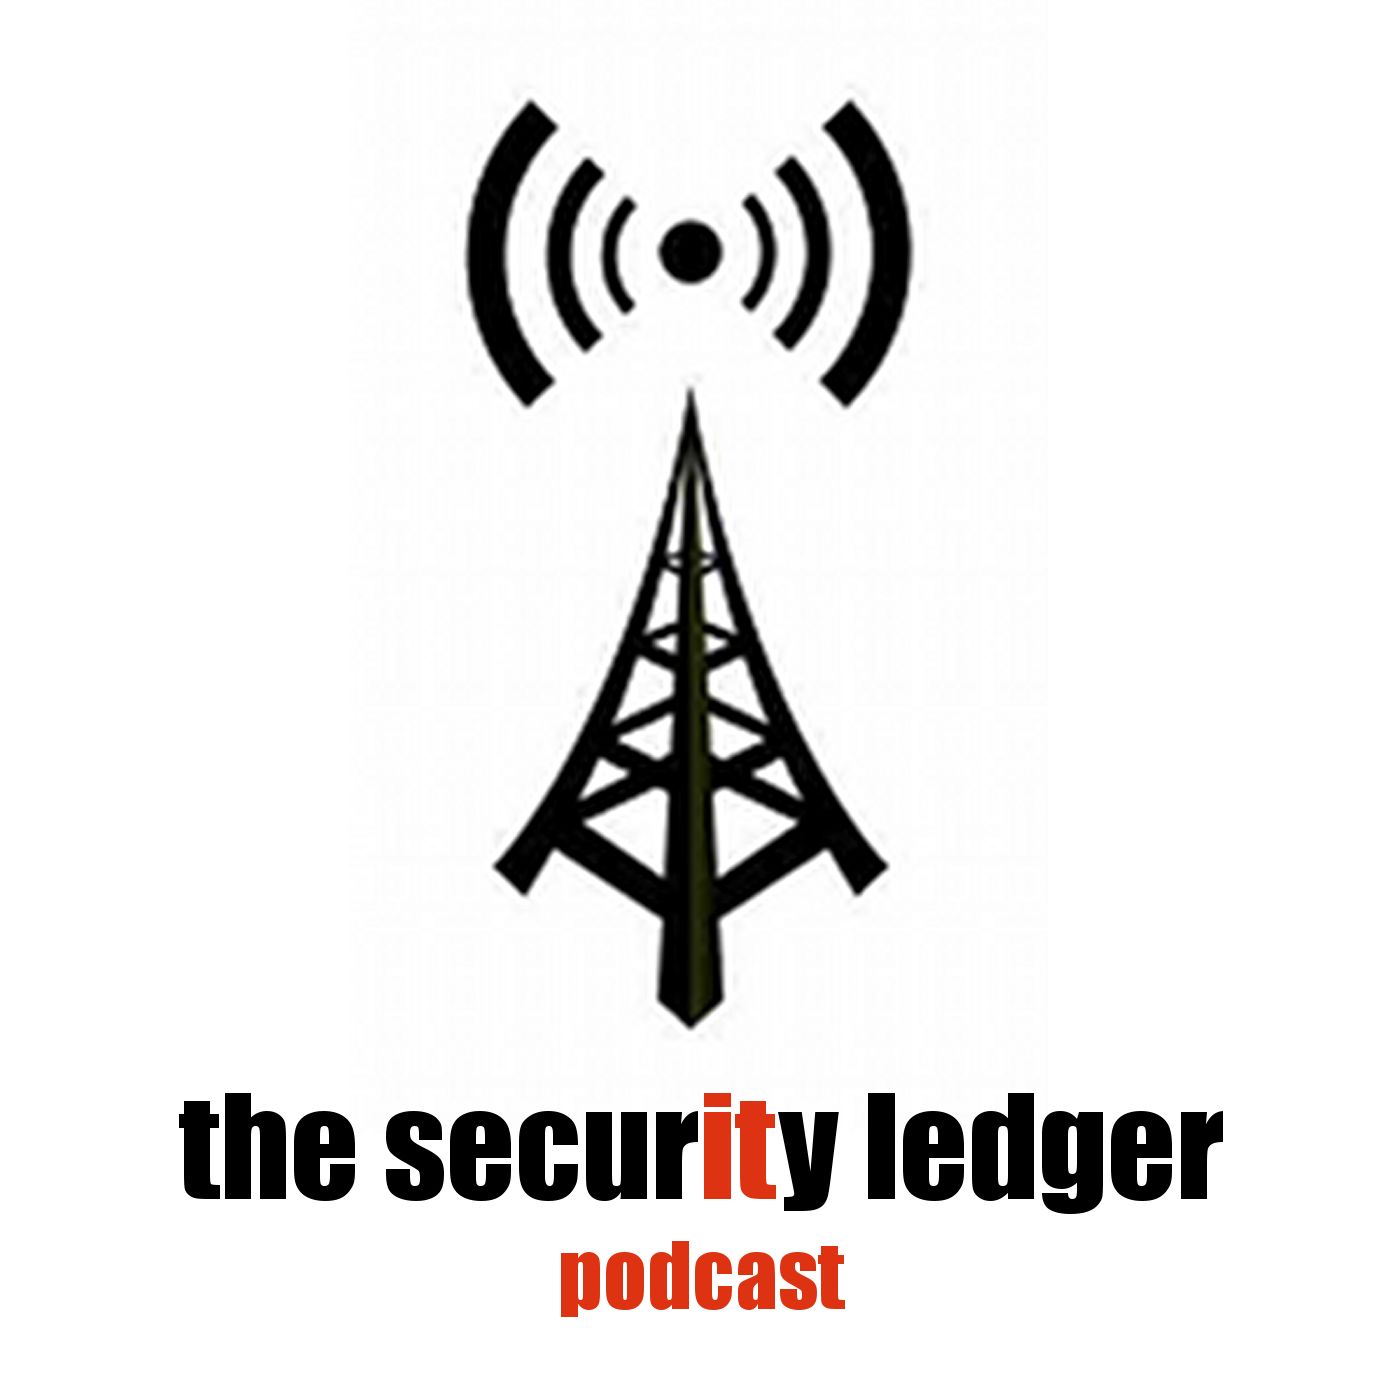 The Security Ledger Podcast